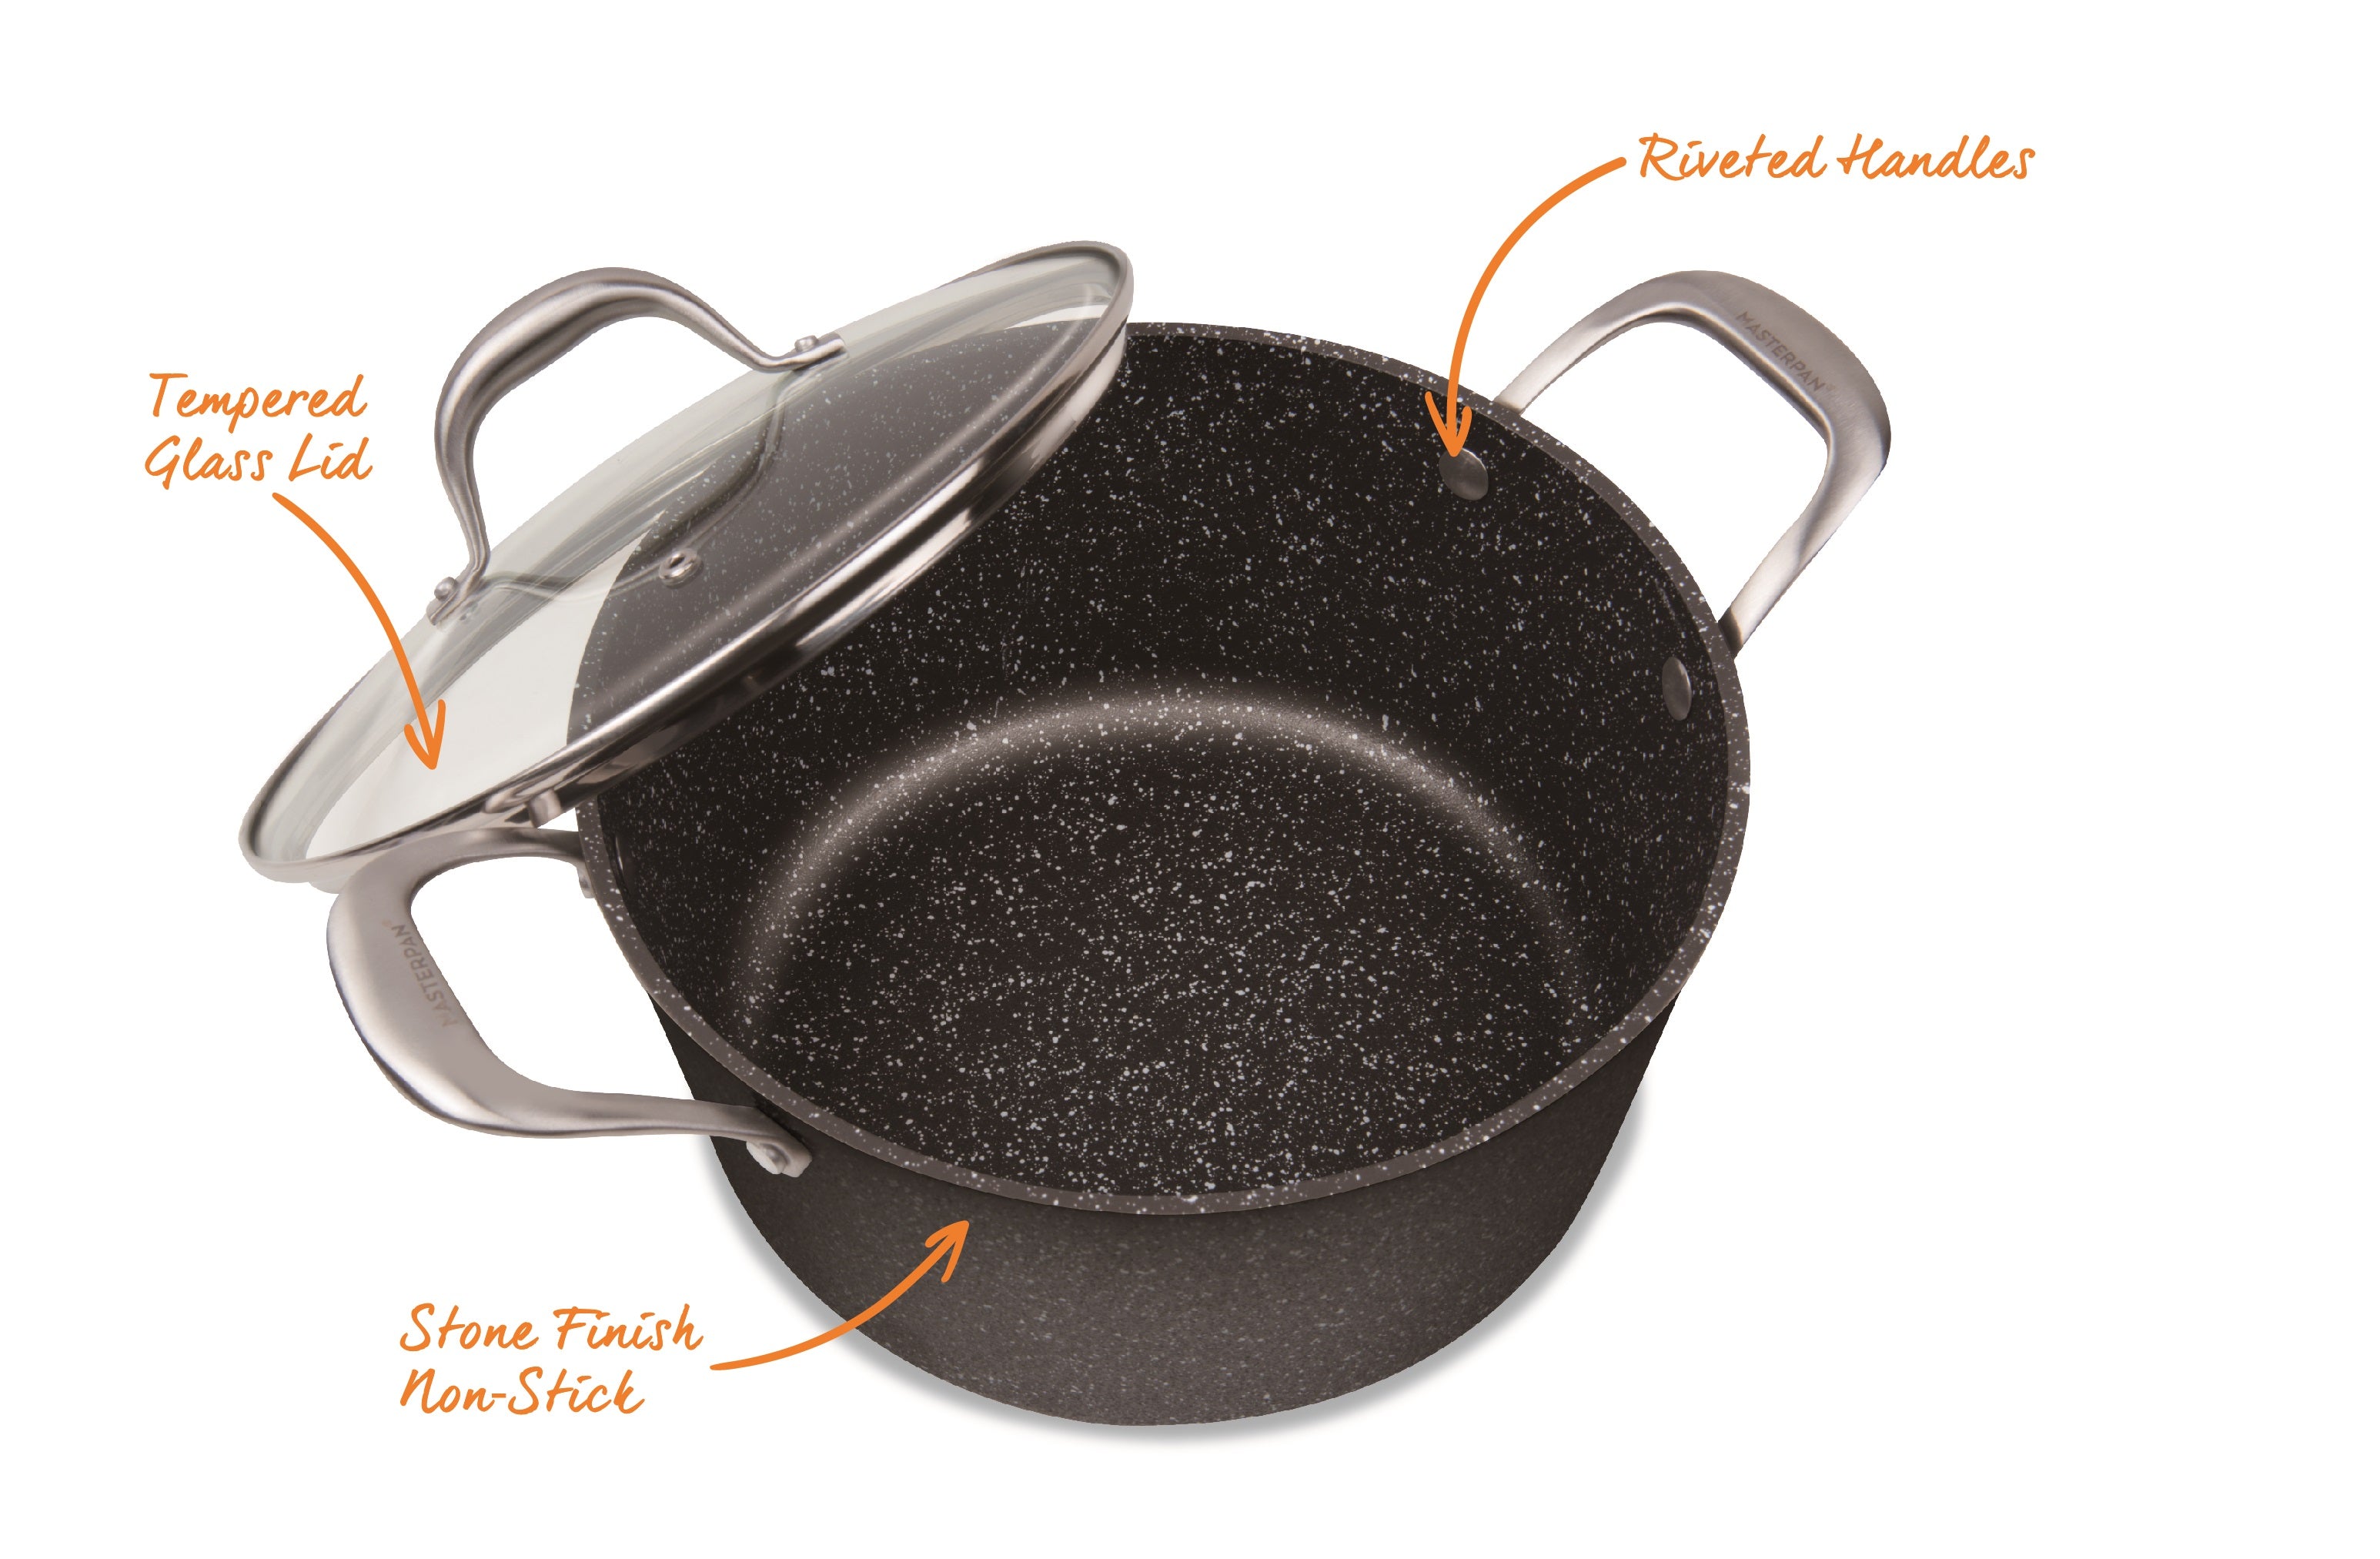 Sauce Pan with Glass Lid, Non Stick Small Pot with Granite Coating